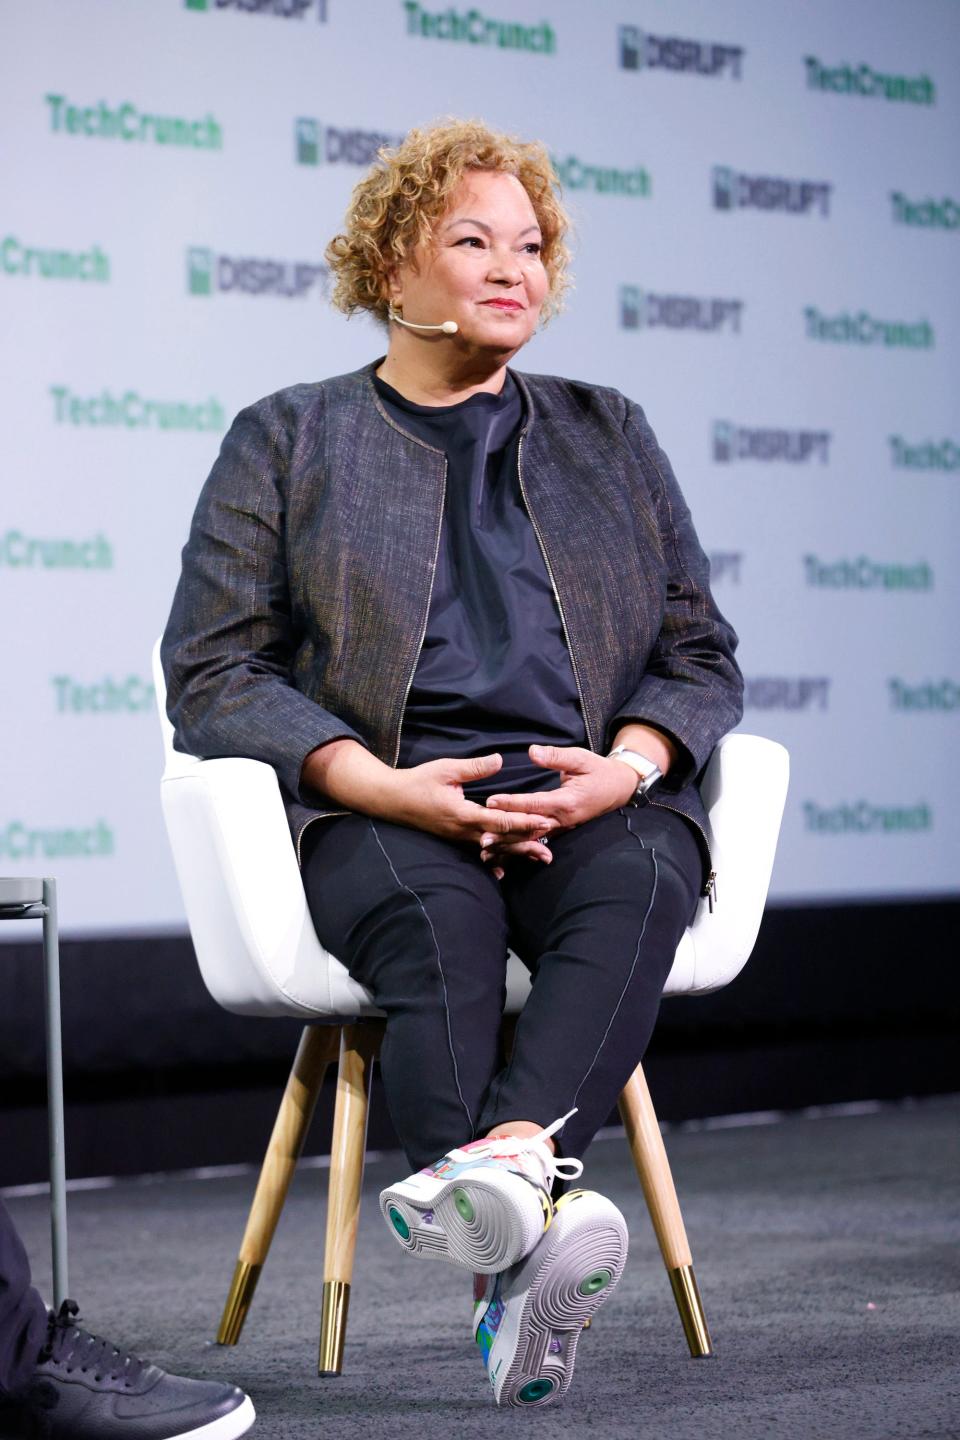 Apple vice president of environment, policy, and social initiatives Lisa Jackson speaks onstage during TechCrunch Disrupt 2023 at Moscone Center on September 19, 2023 in San Francisco, California.